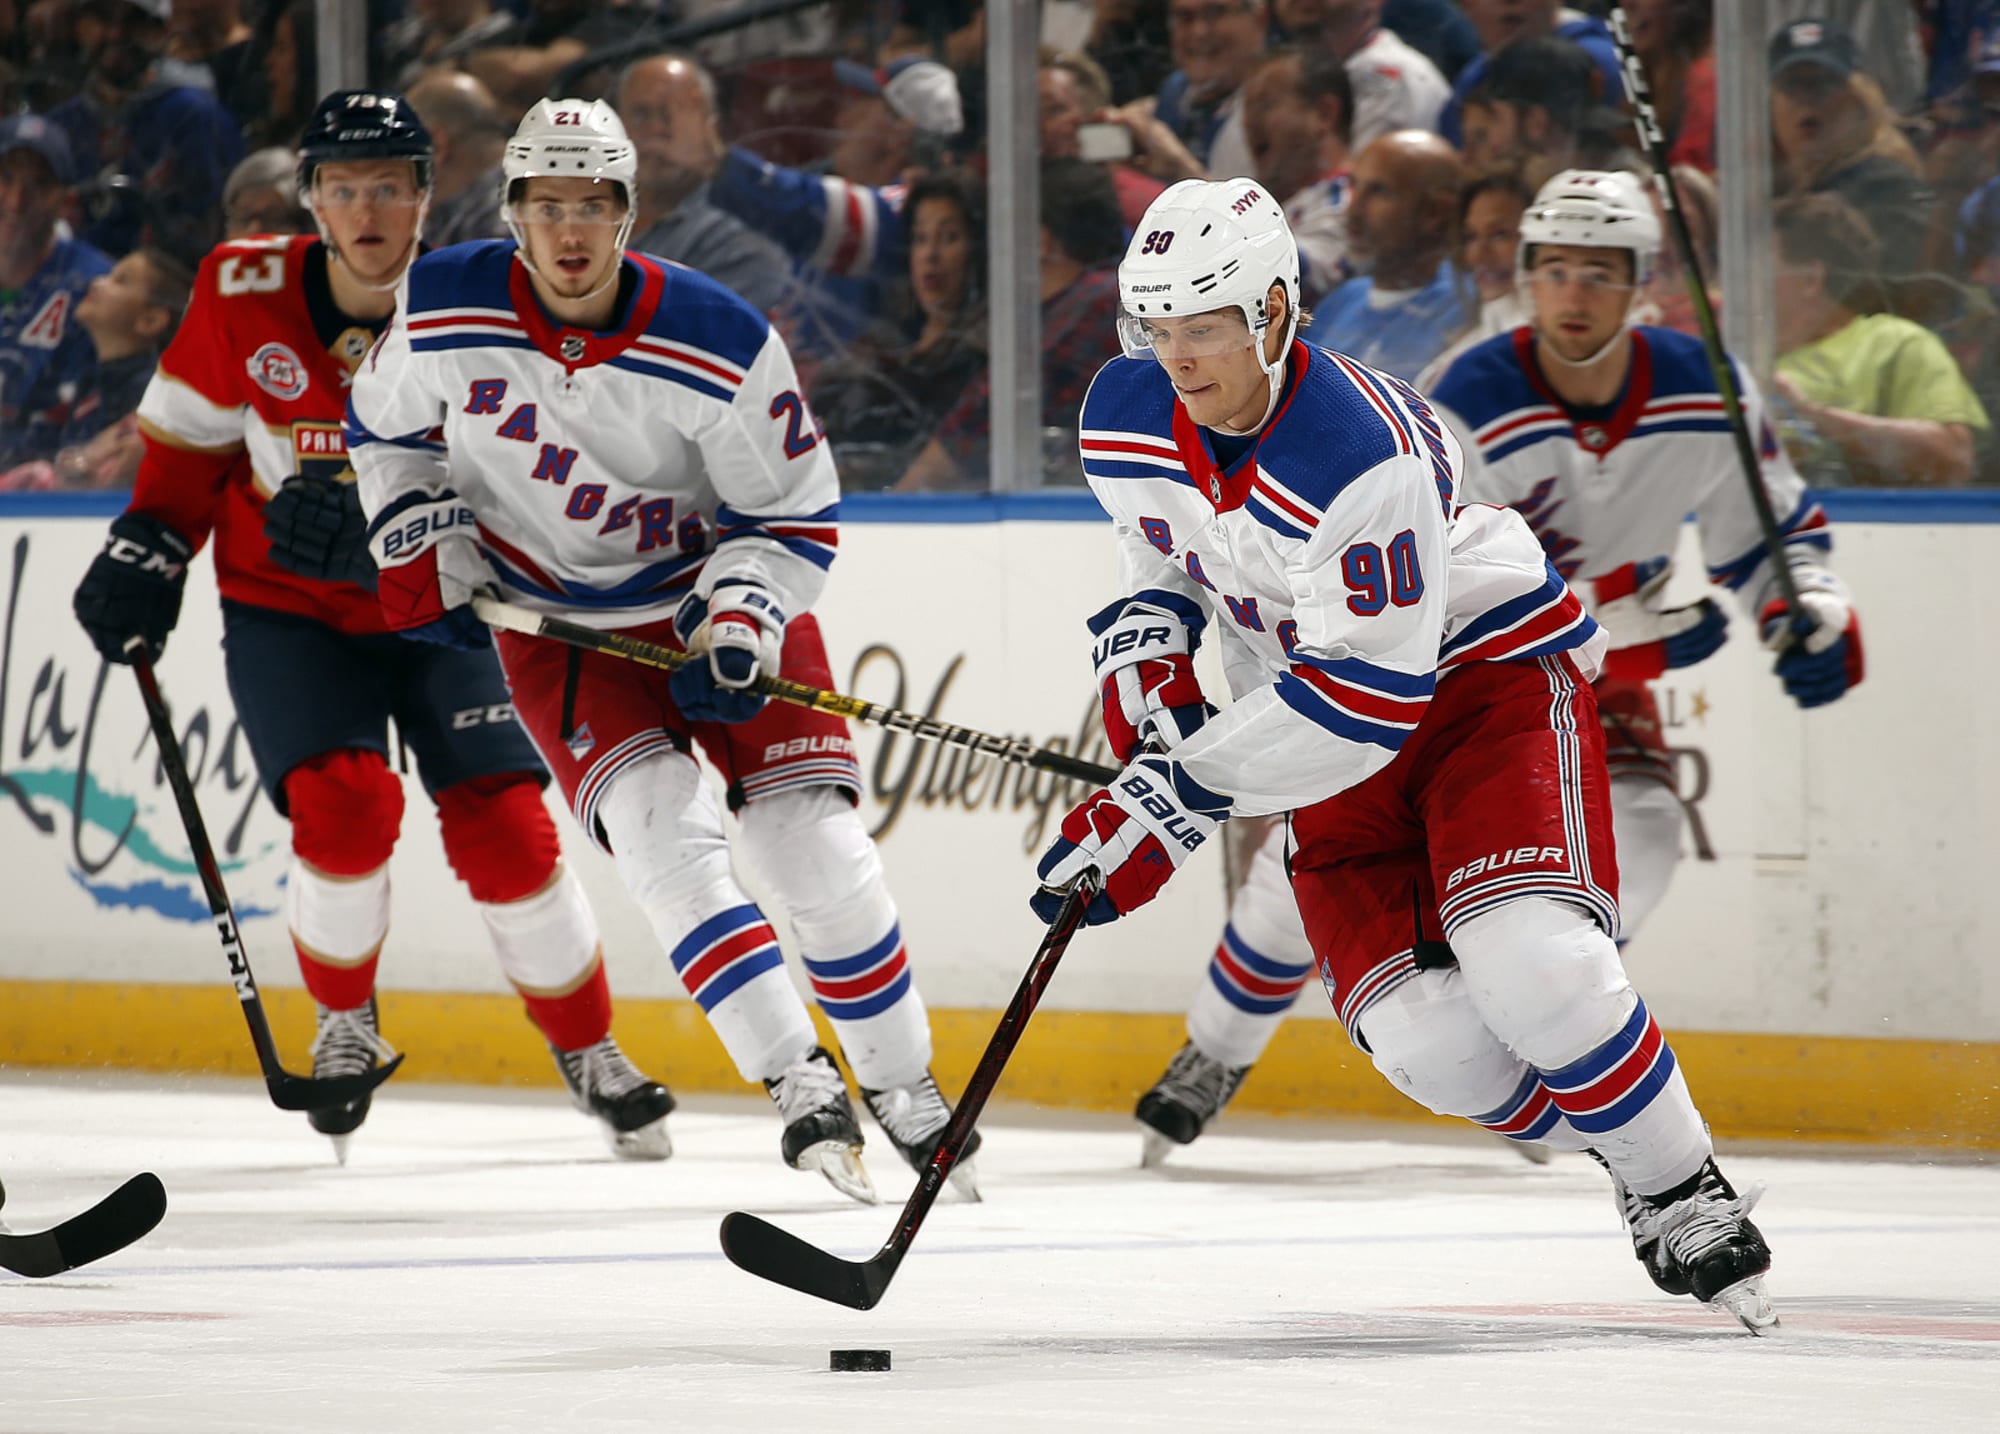 A look at the playoff picture for the New York Rangers